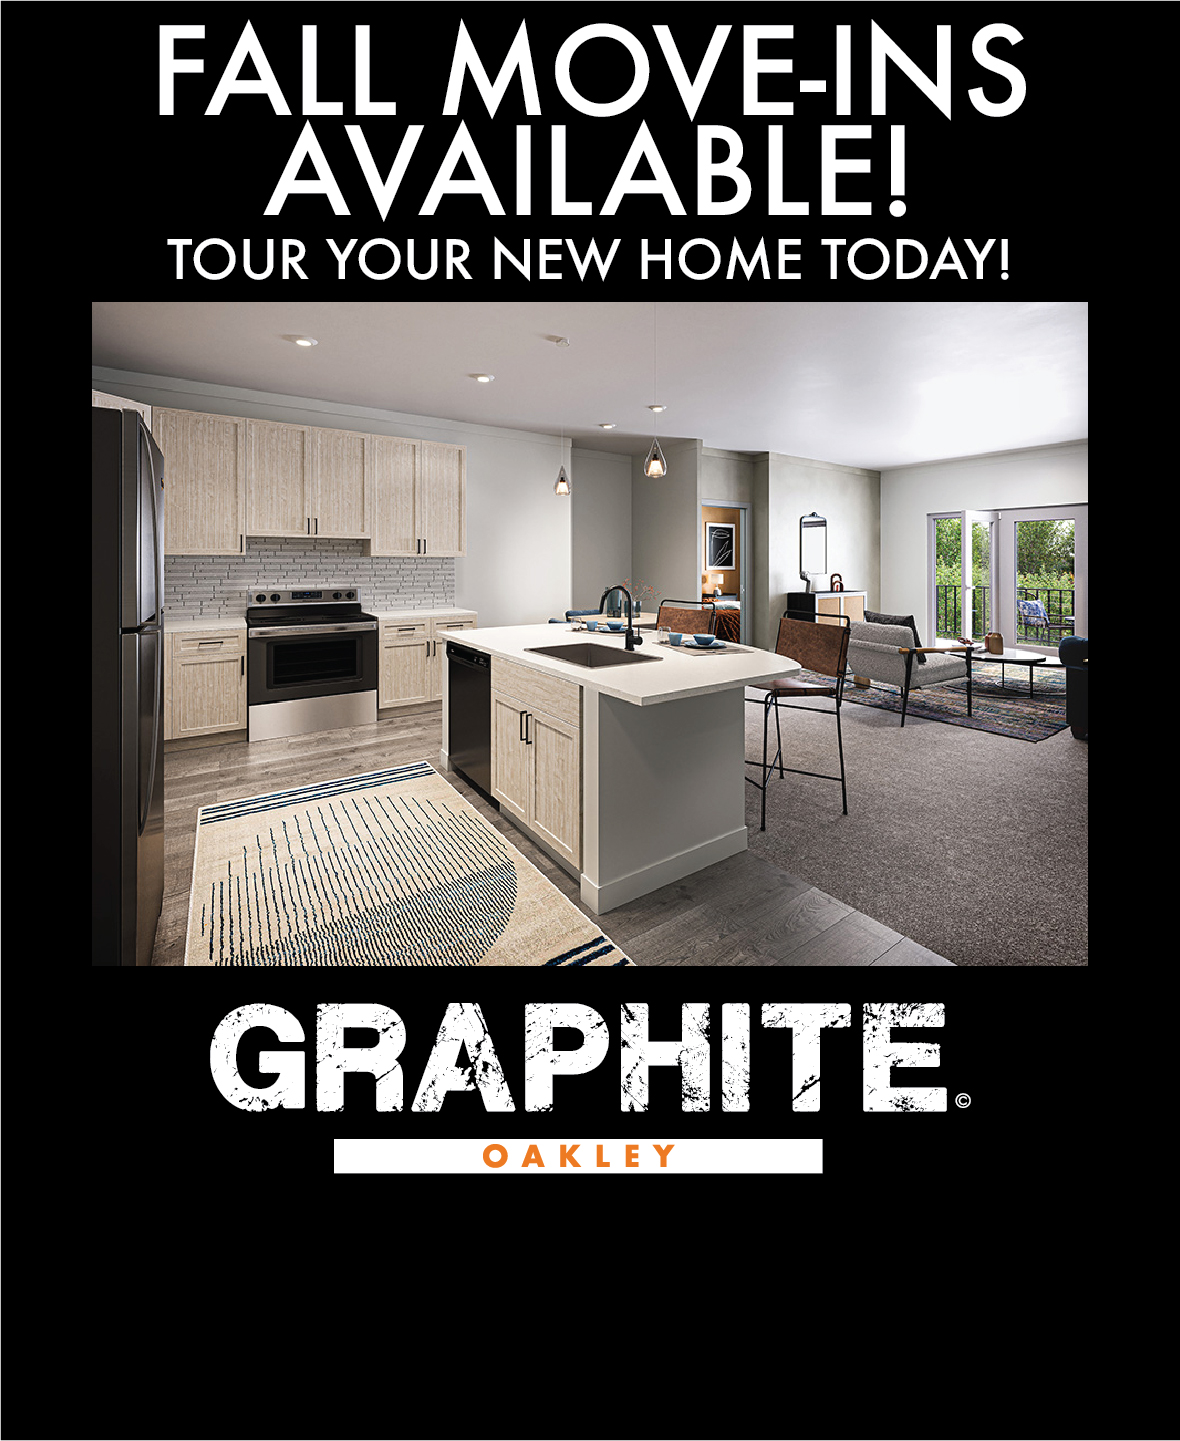 Fall Move-Ins Available at Graphite Oakley